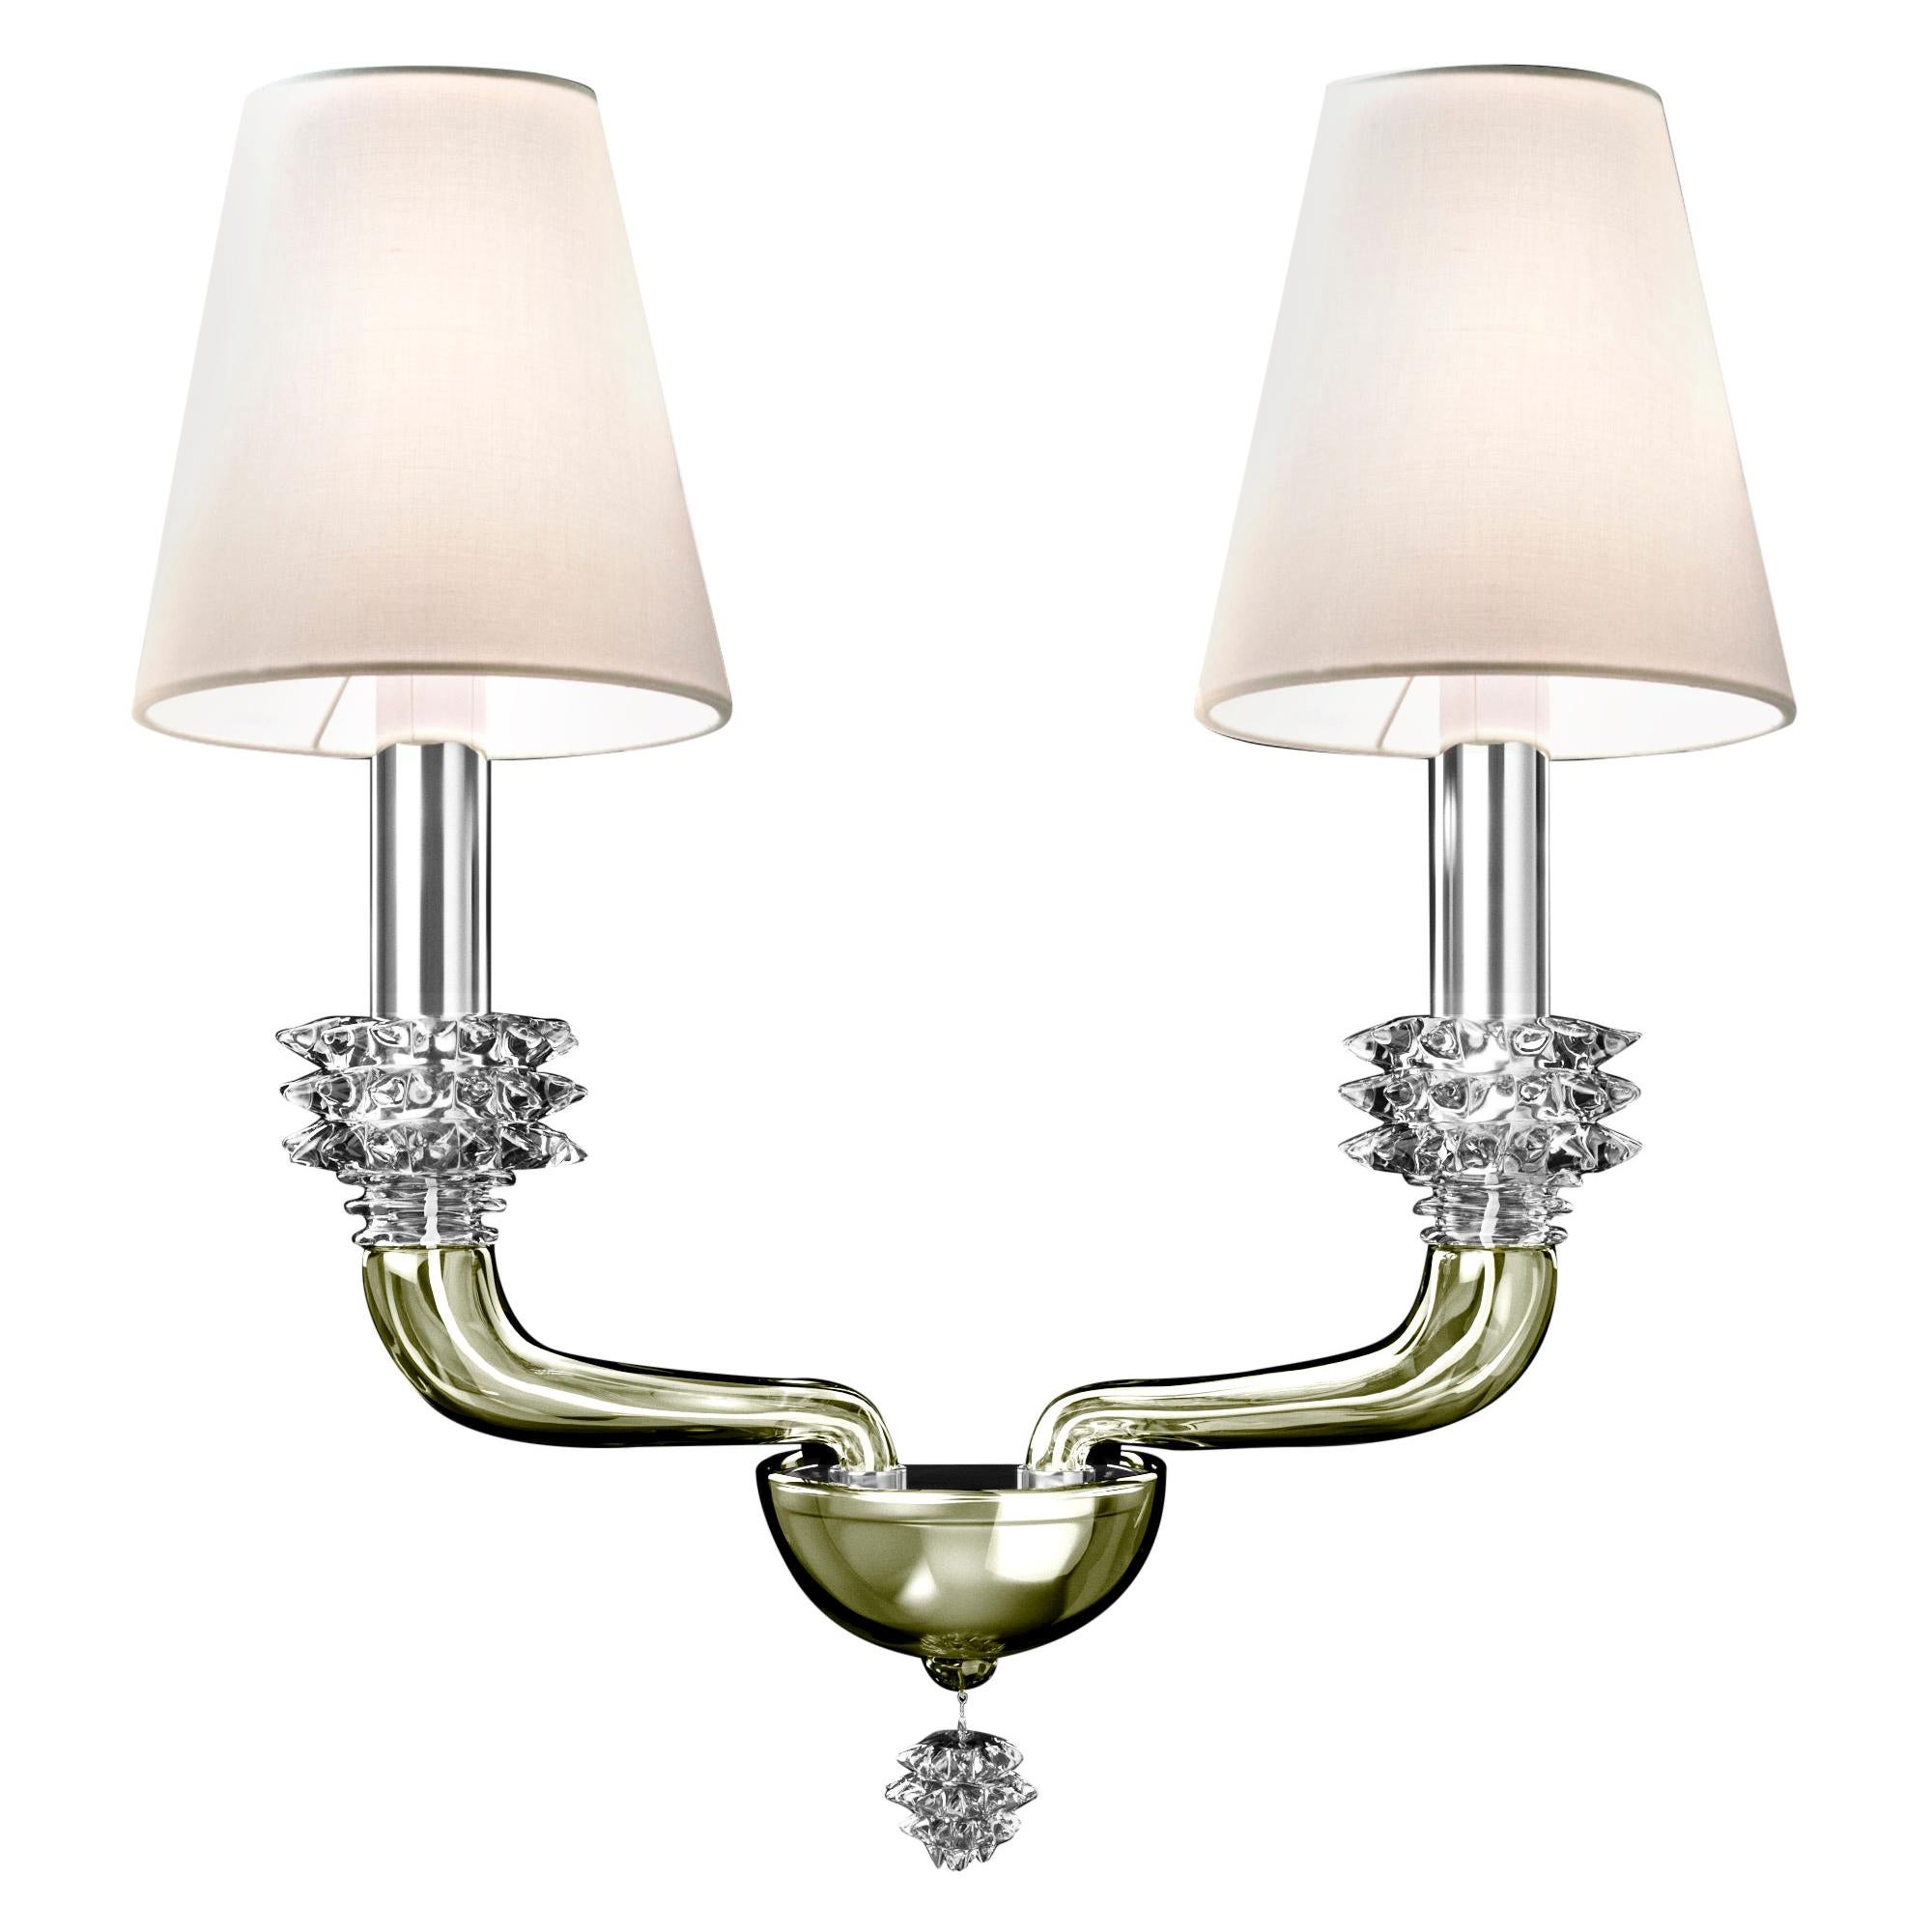 Green (Liquid Citron_EL) Rotterdam 5563 02 Wall Sconce in Glass with White Shade, by Barovier&Toso